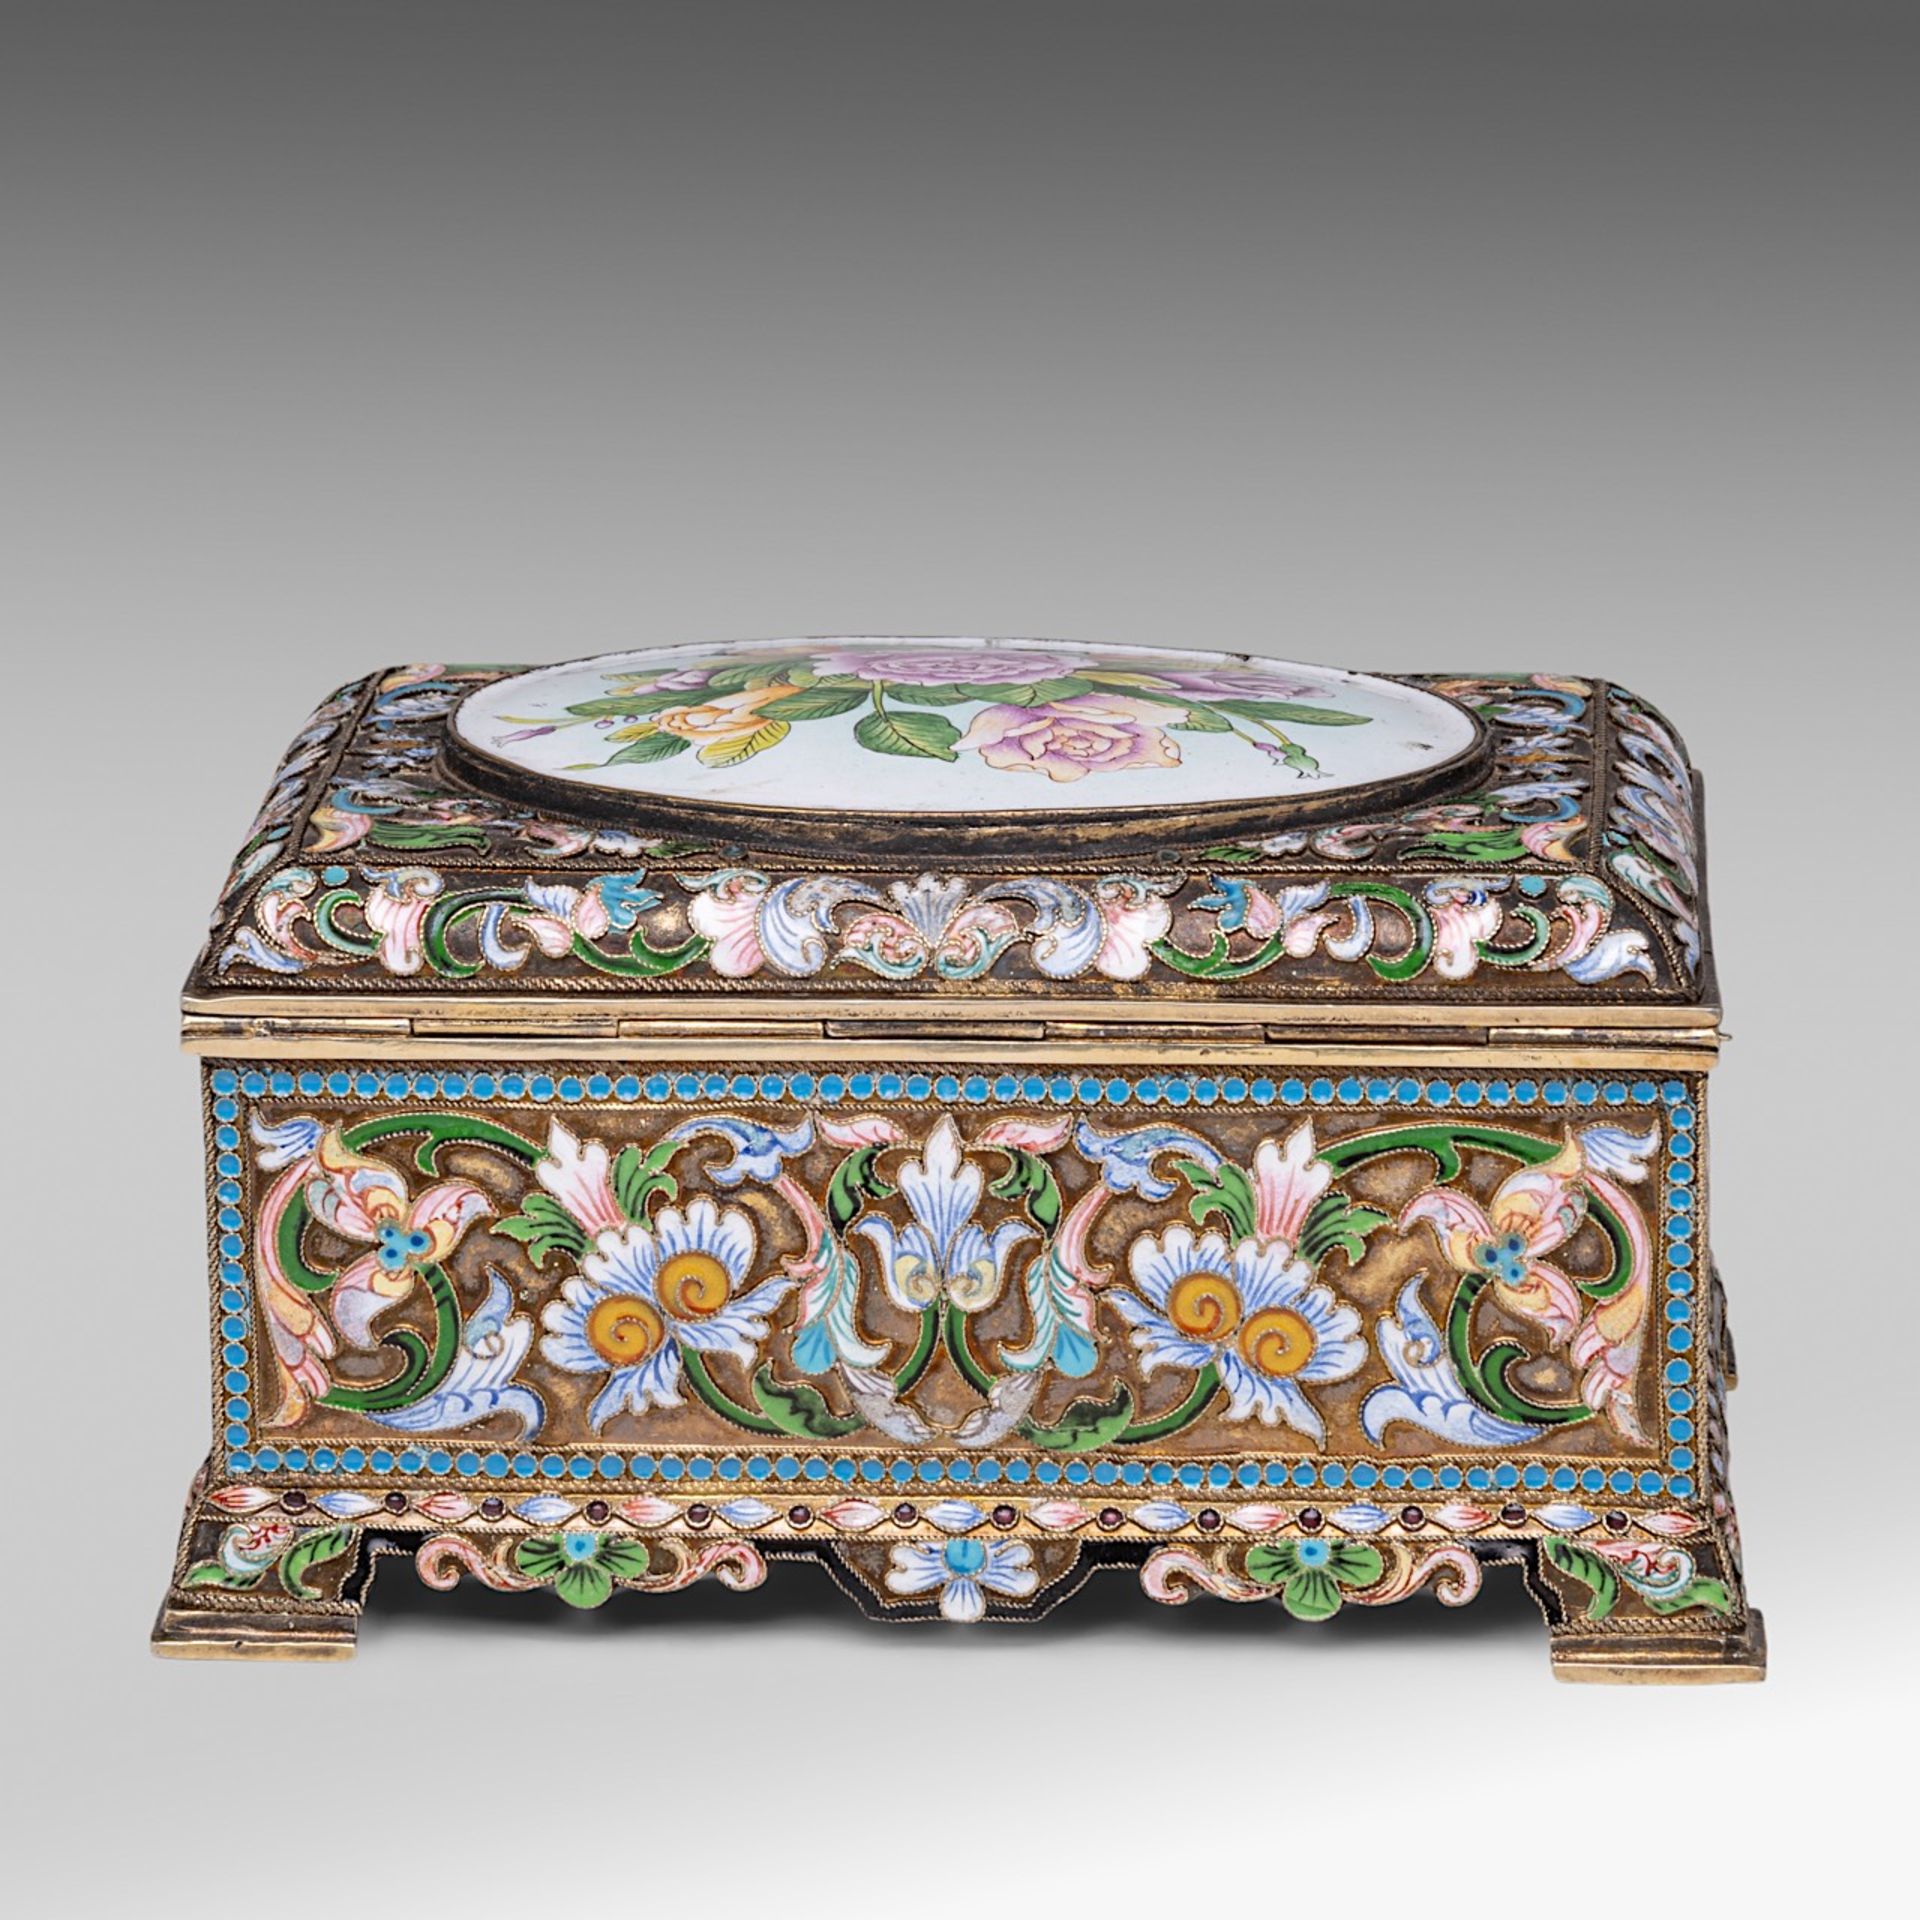 A Russian silver and enamel floral decorated jewellery box, hallmarked 84 Zolotniki, H 8 - 15 - 10 c - Bild 4 aus 9